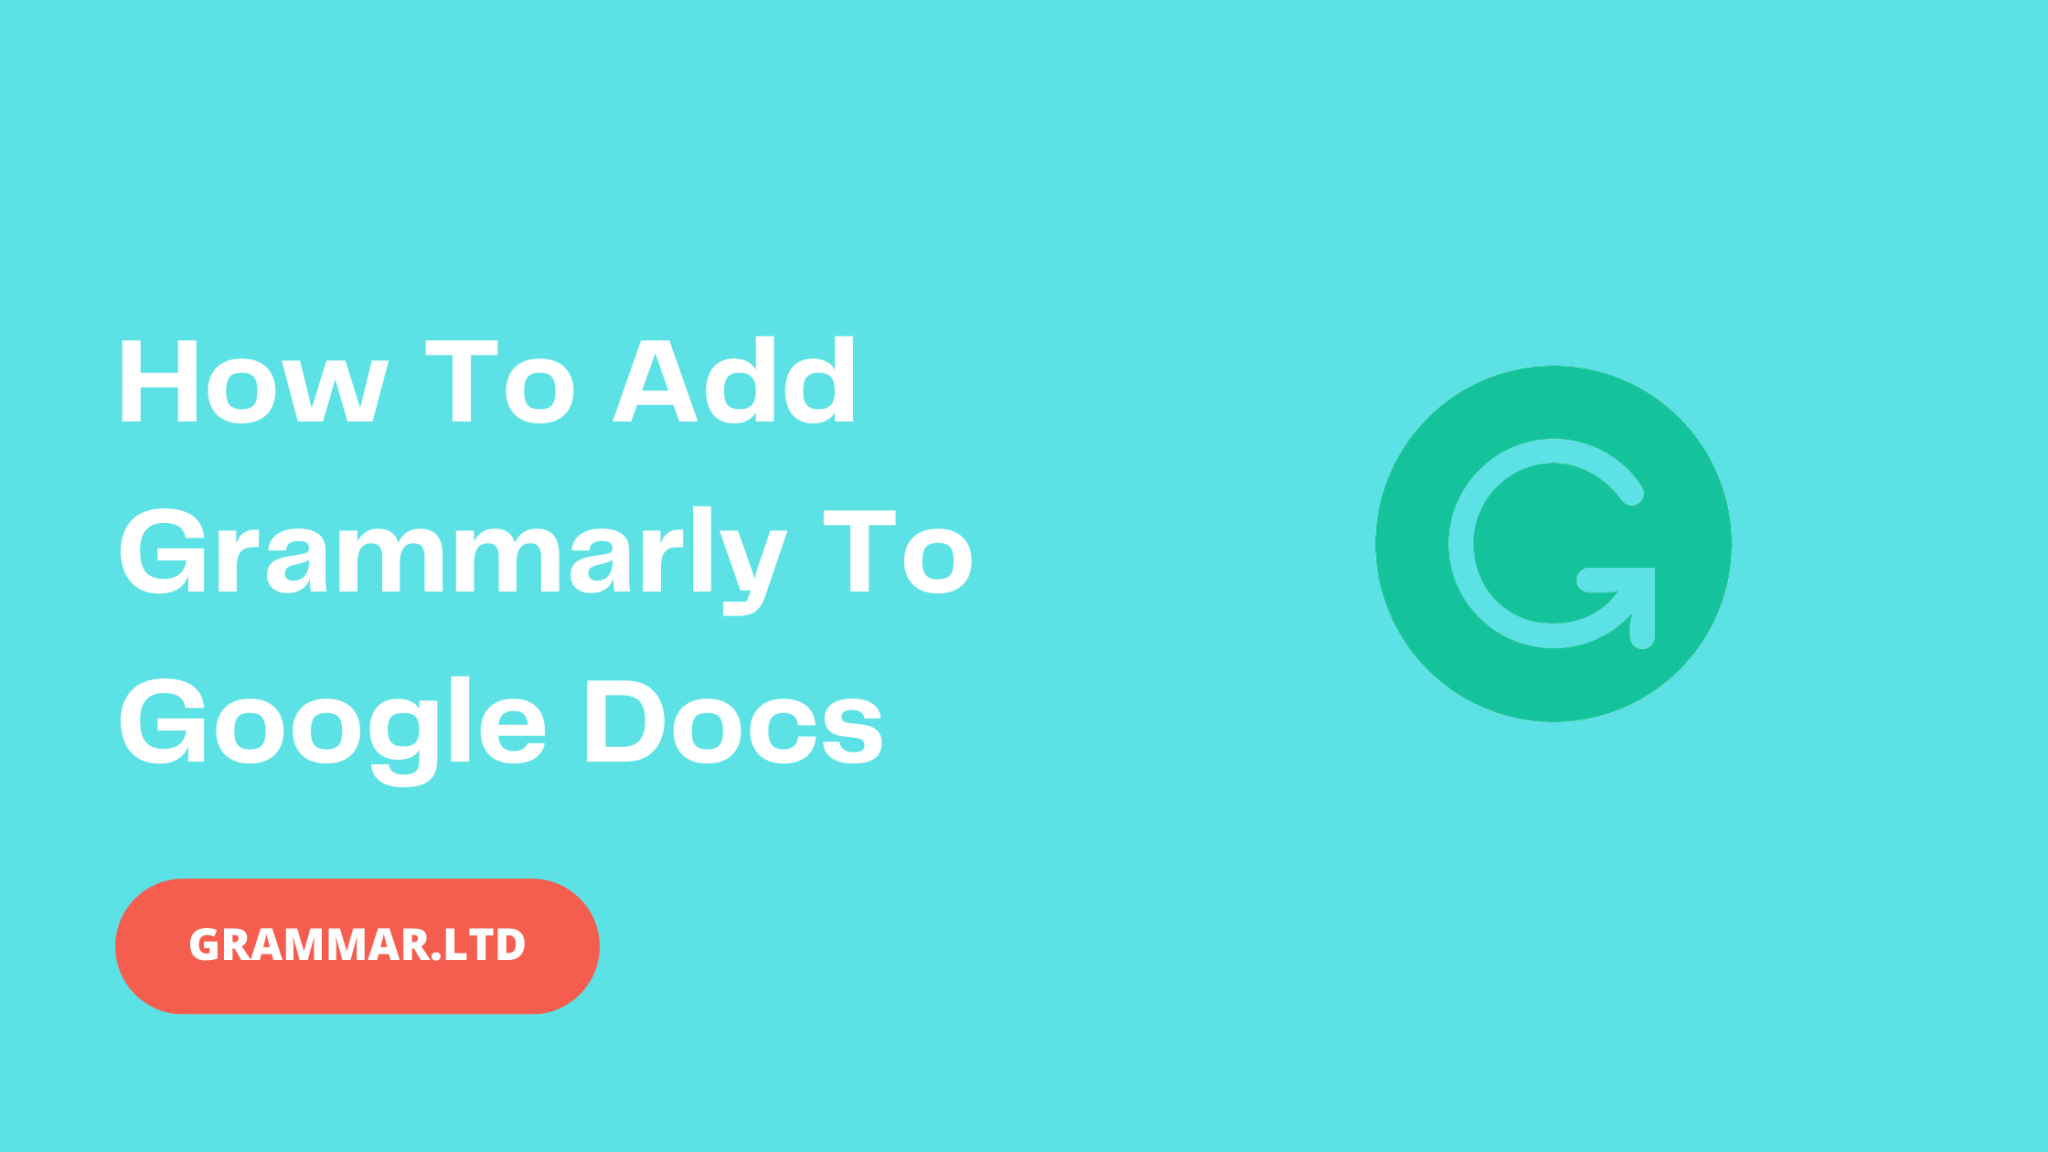 does the free grammarly work on google docs